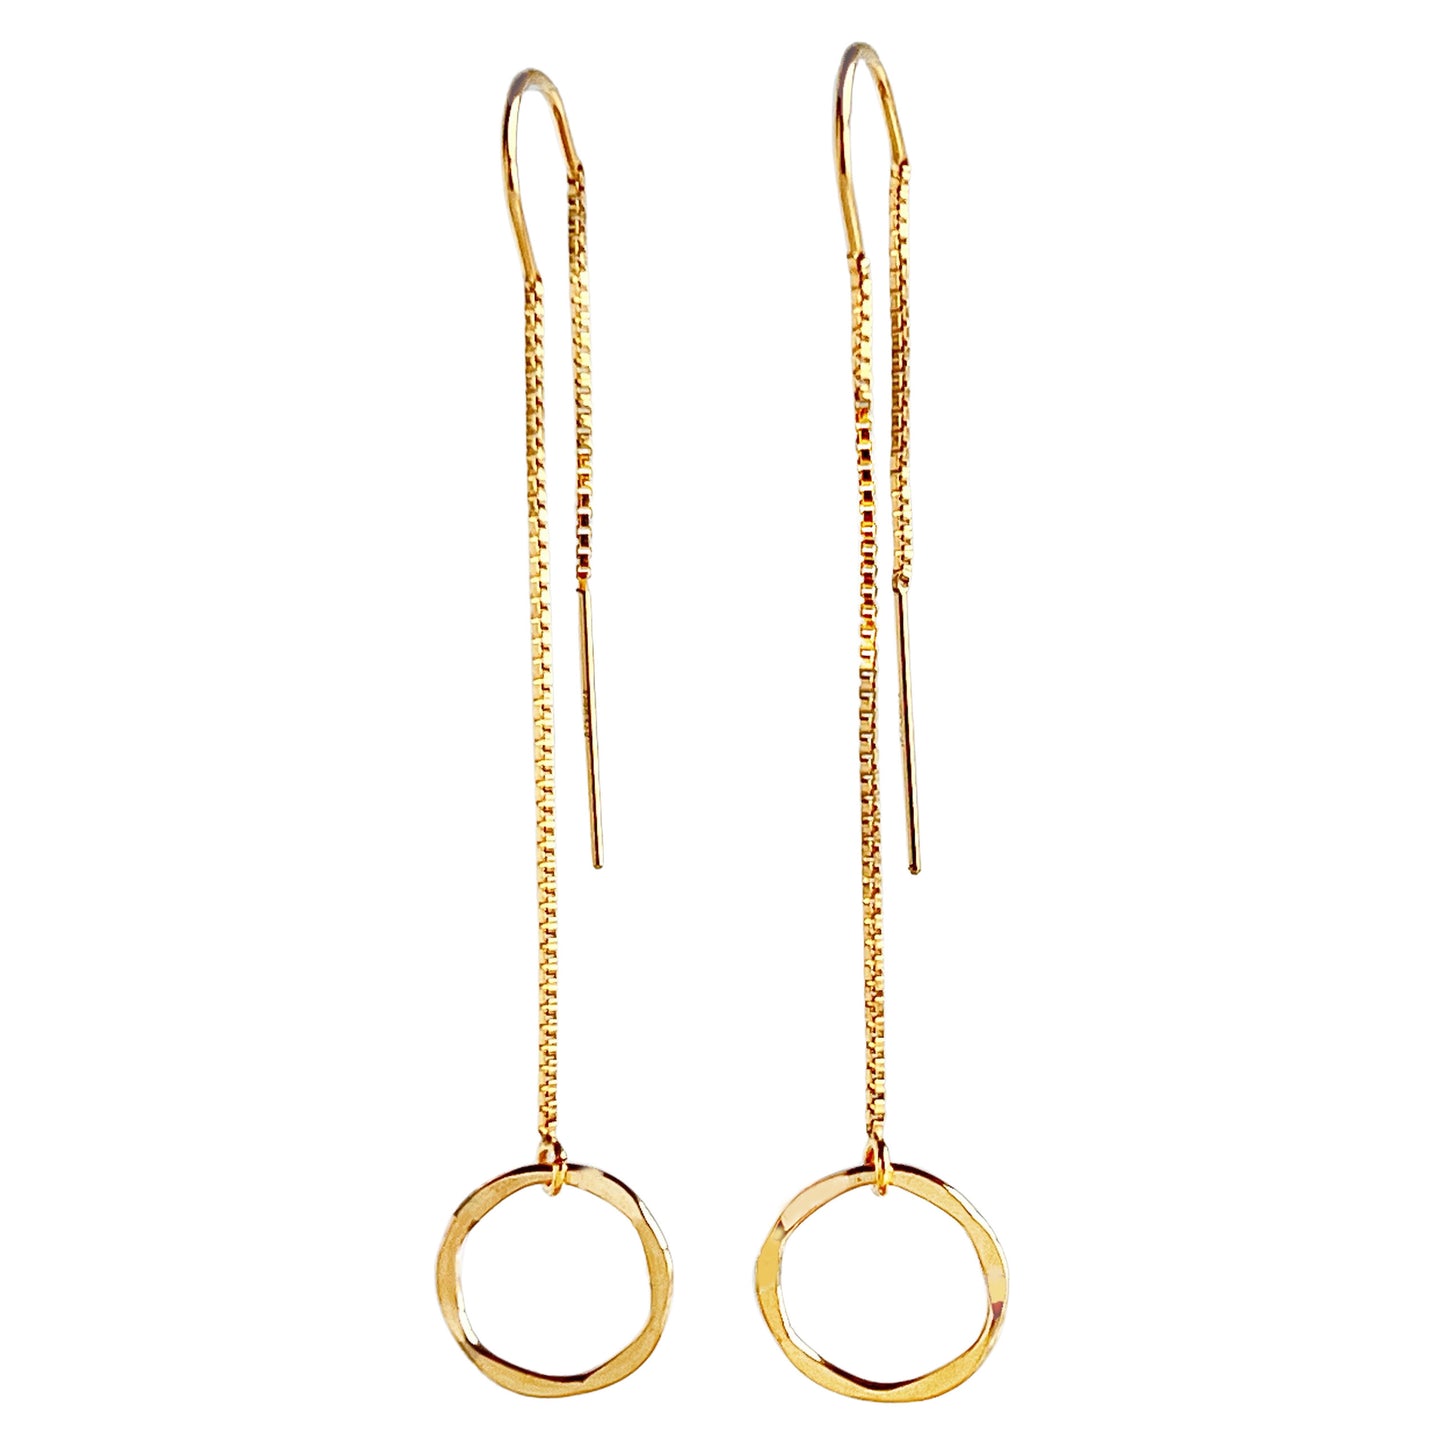 14k gold filled long dangle threader earrings with small (10mm) gold hammered ring in front.  Length is 2 inches in the front and 1.5 inches in the back